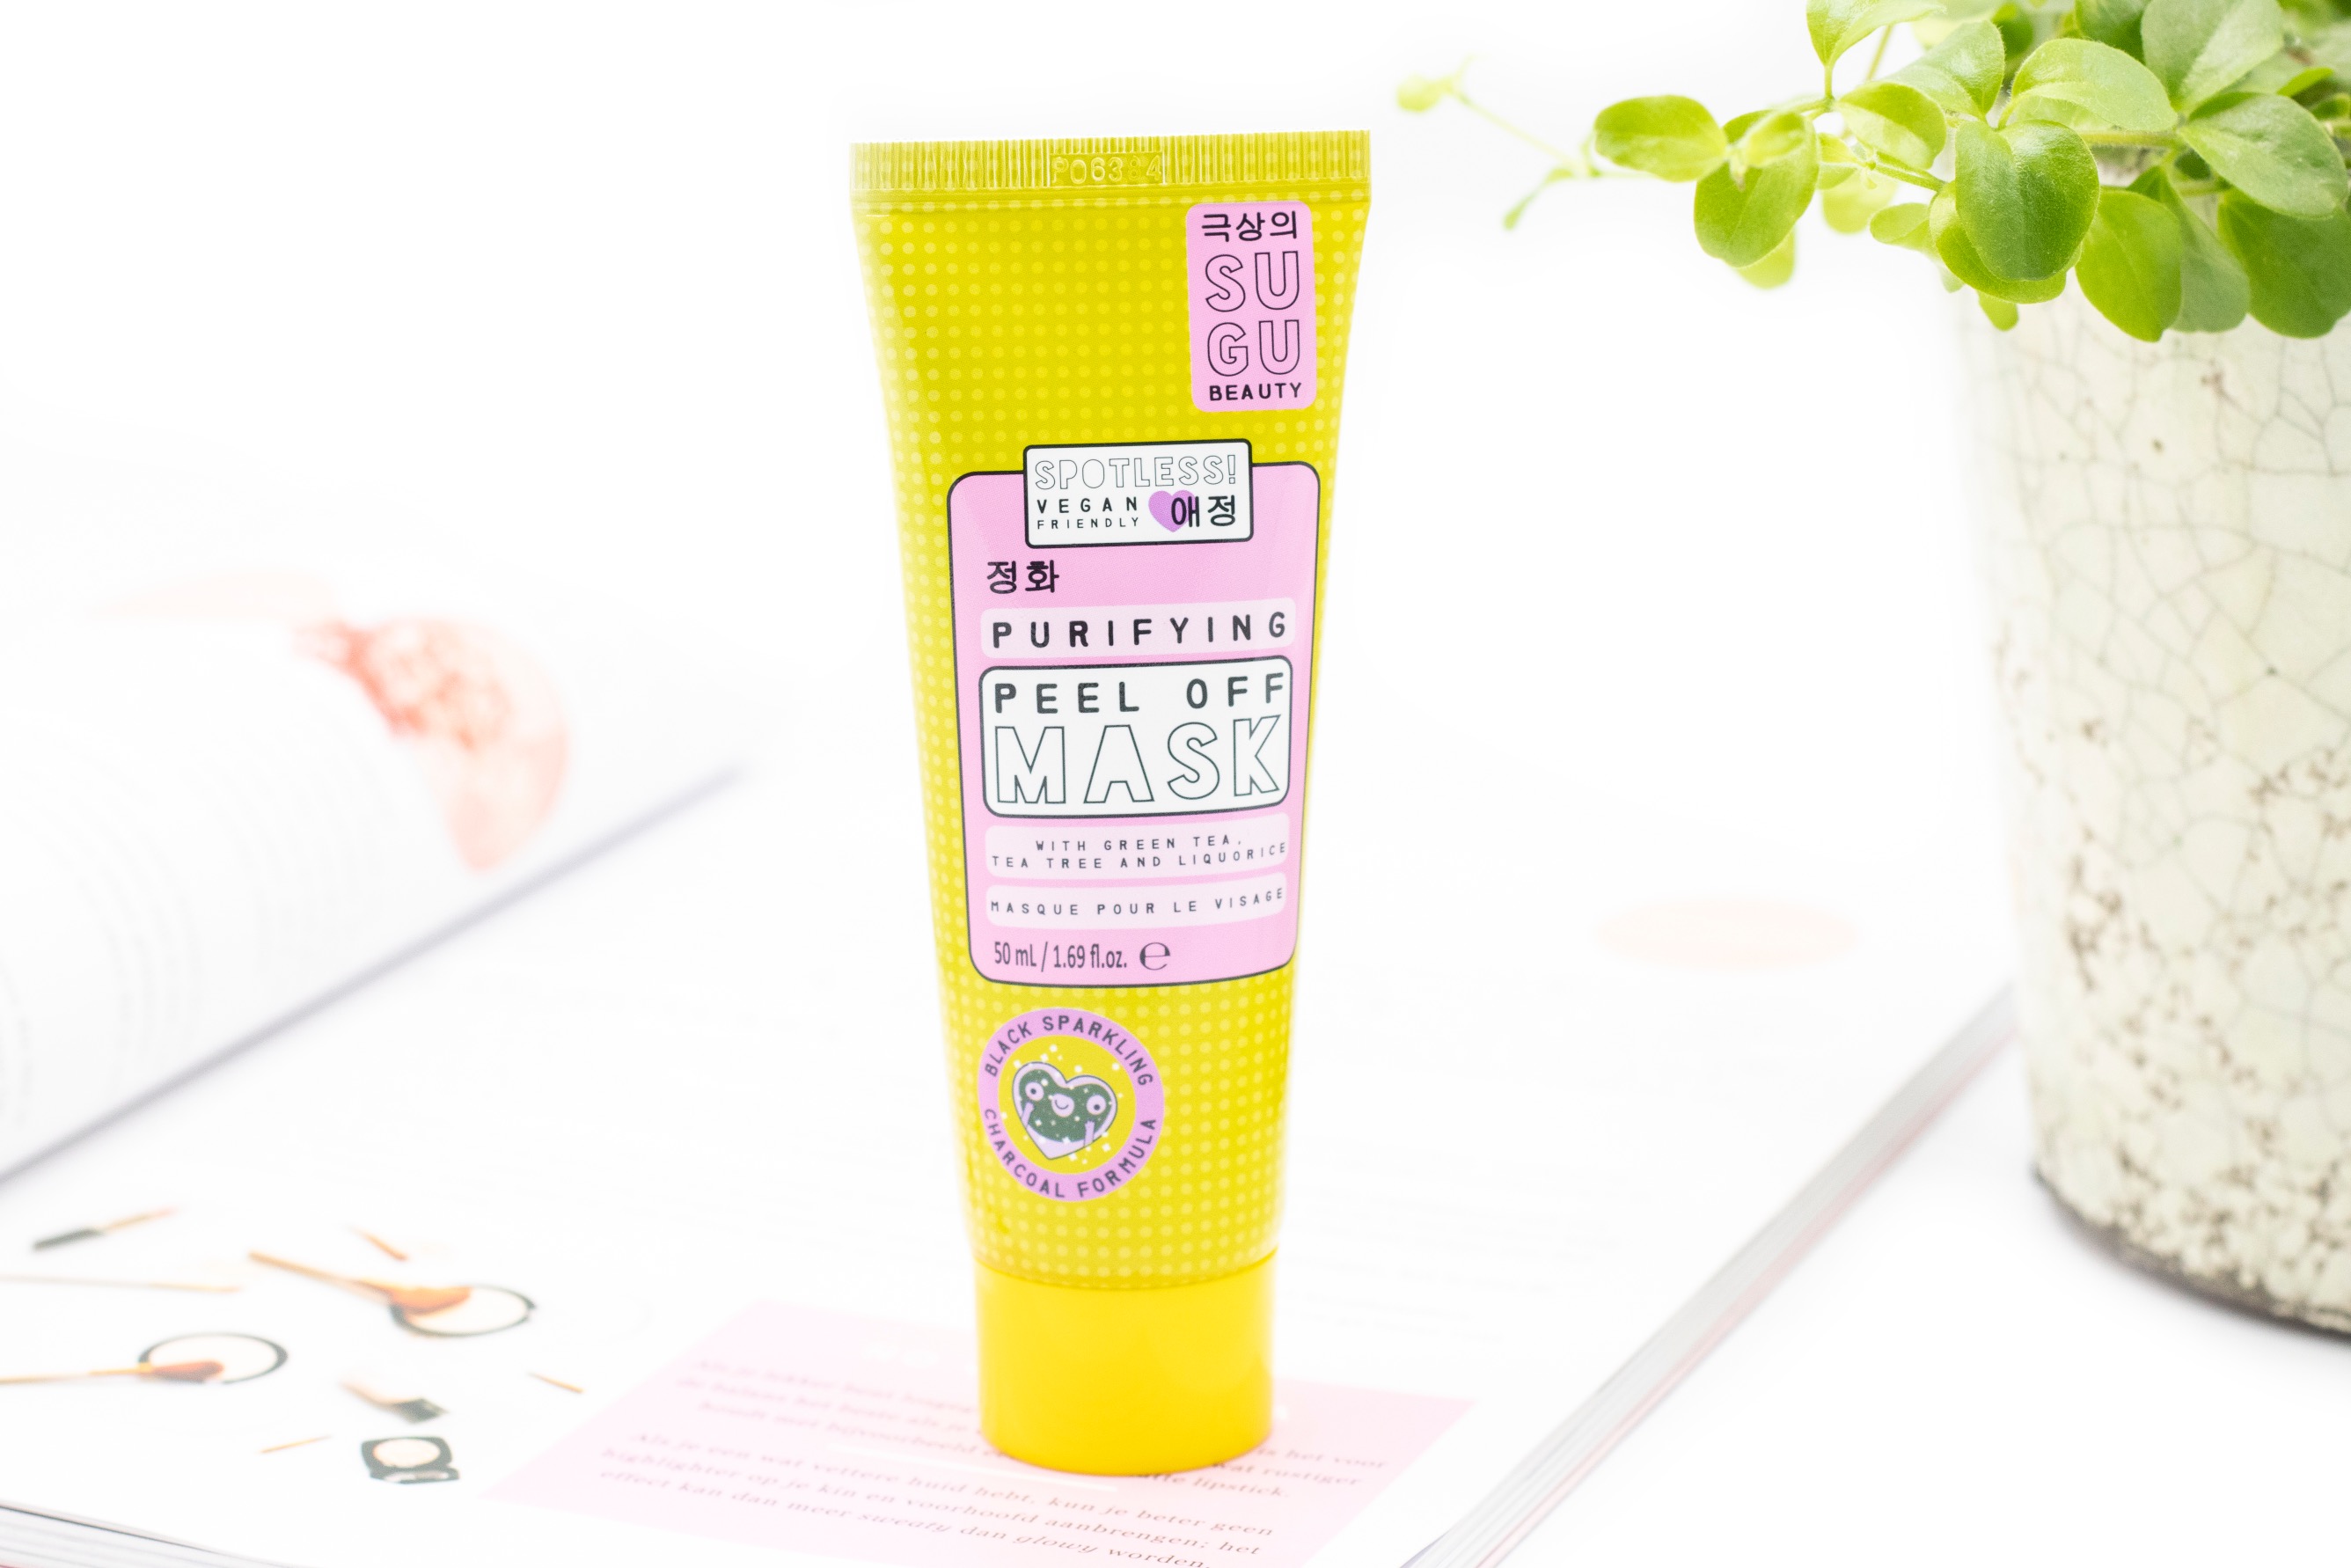 sugu beauty peel off mask review